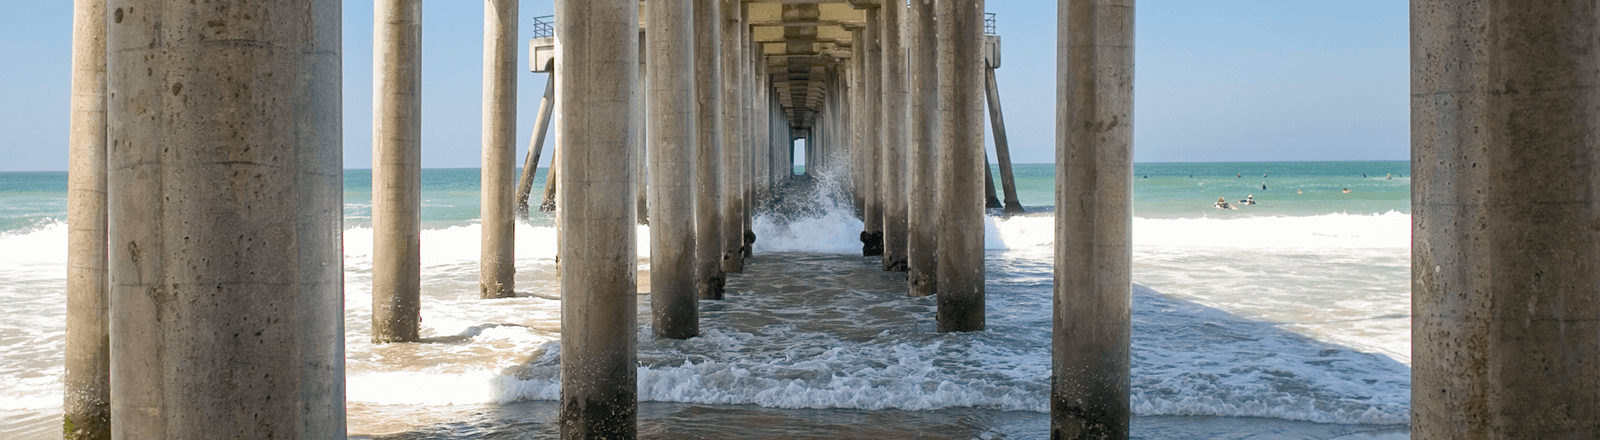 pylons and water underneath the huntington beach pier